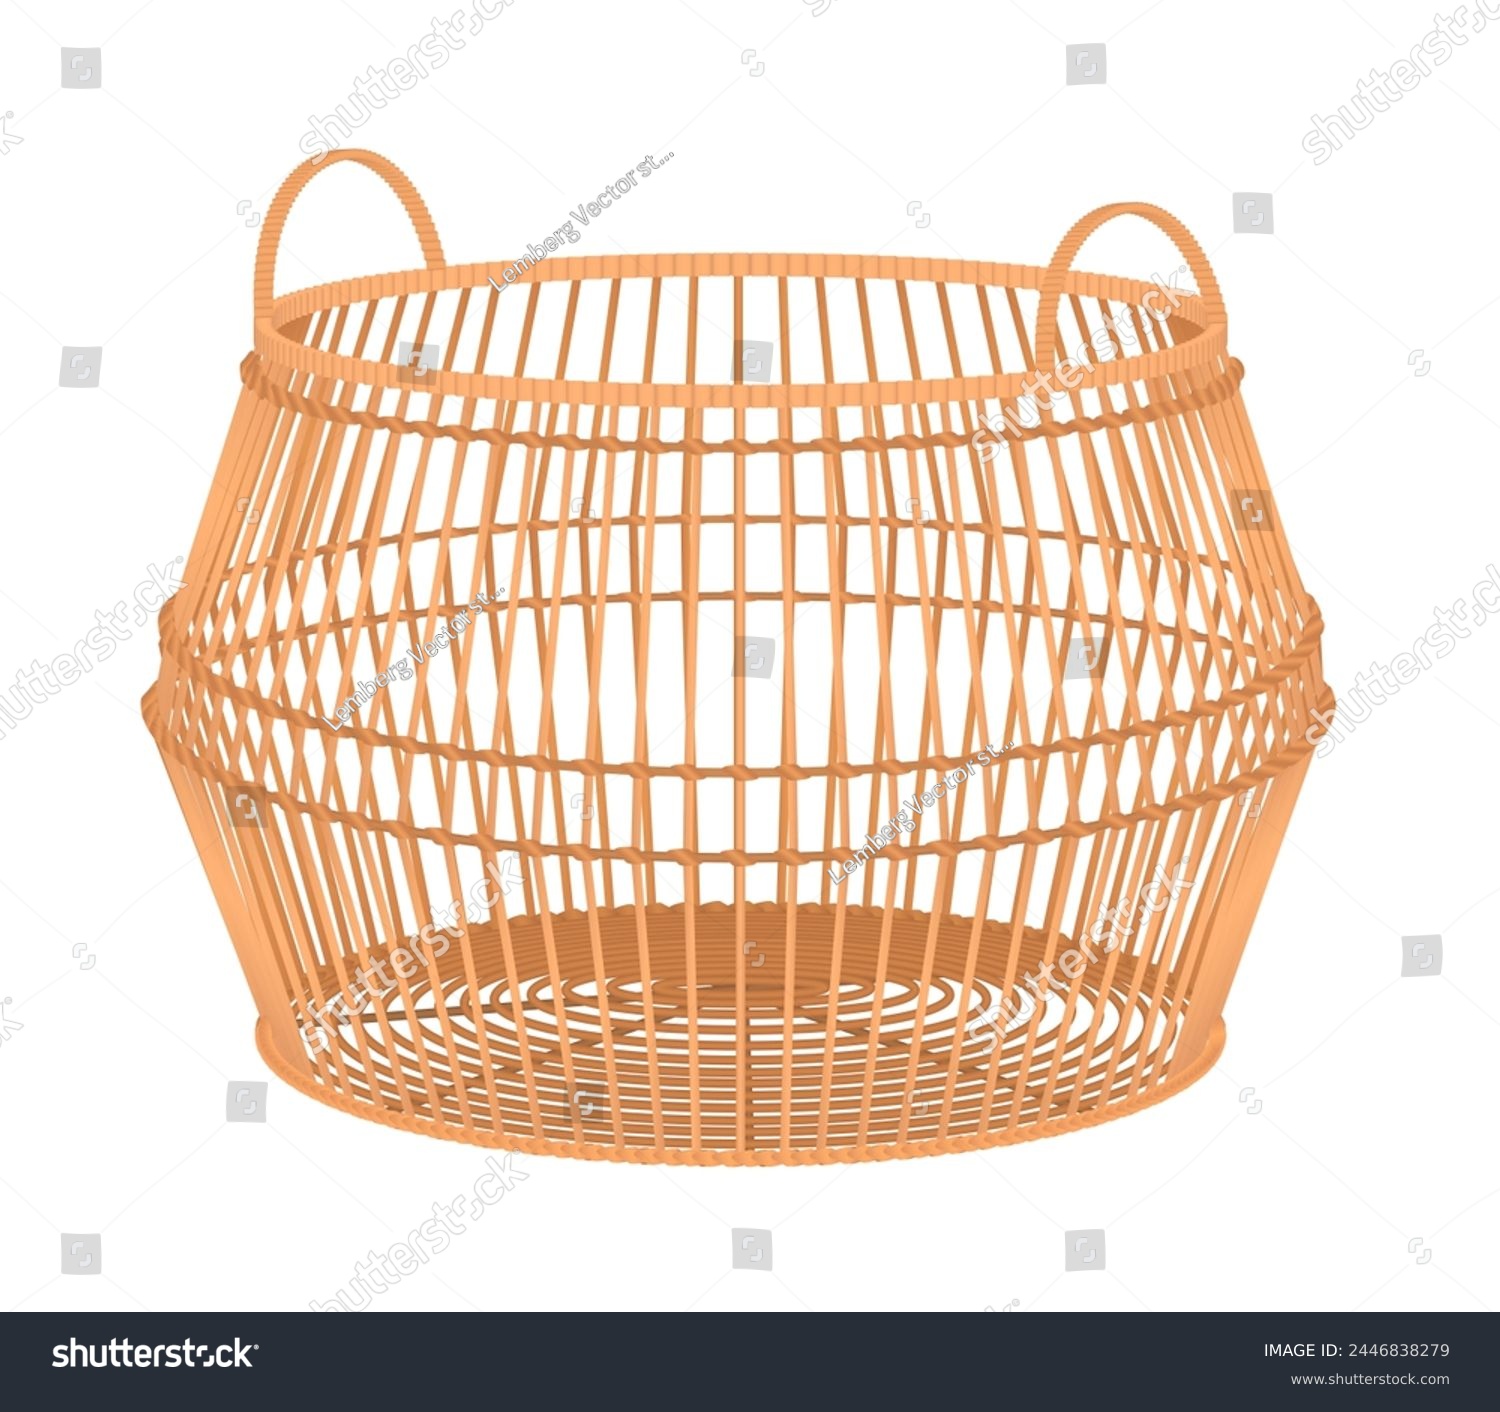 SVG of 3D round empty wicker basket with handles for laundry or storage of things vector illustration svg